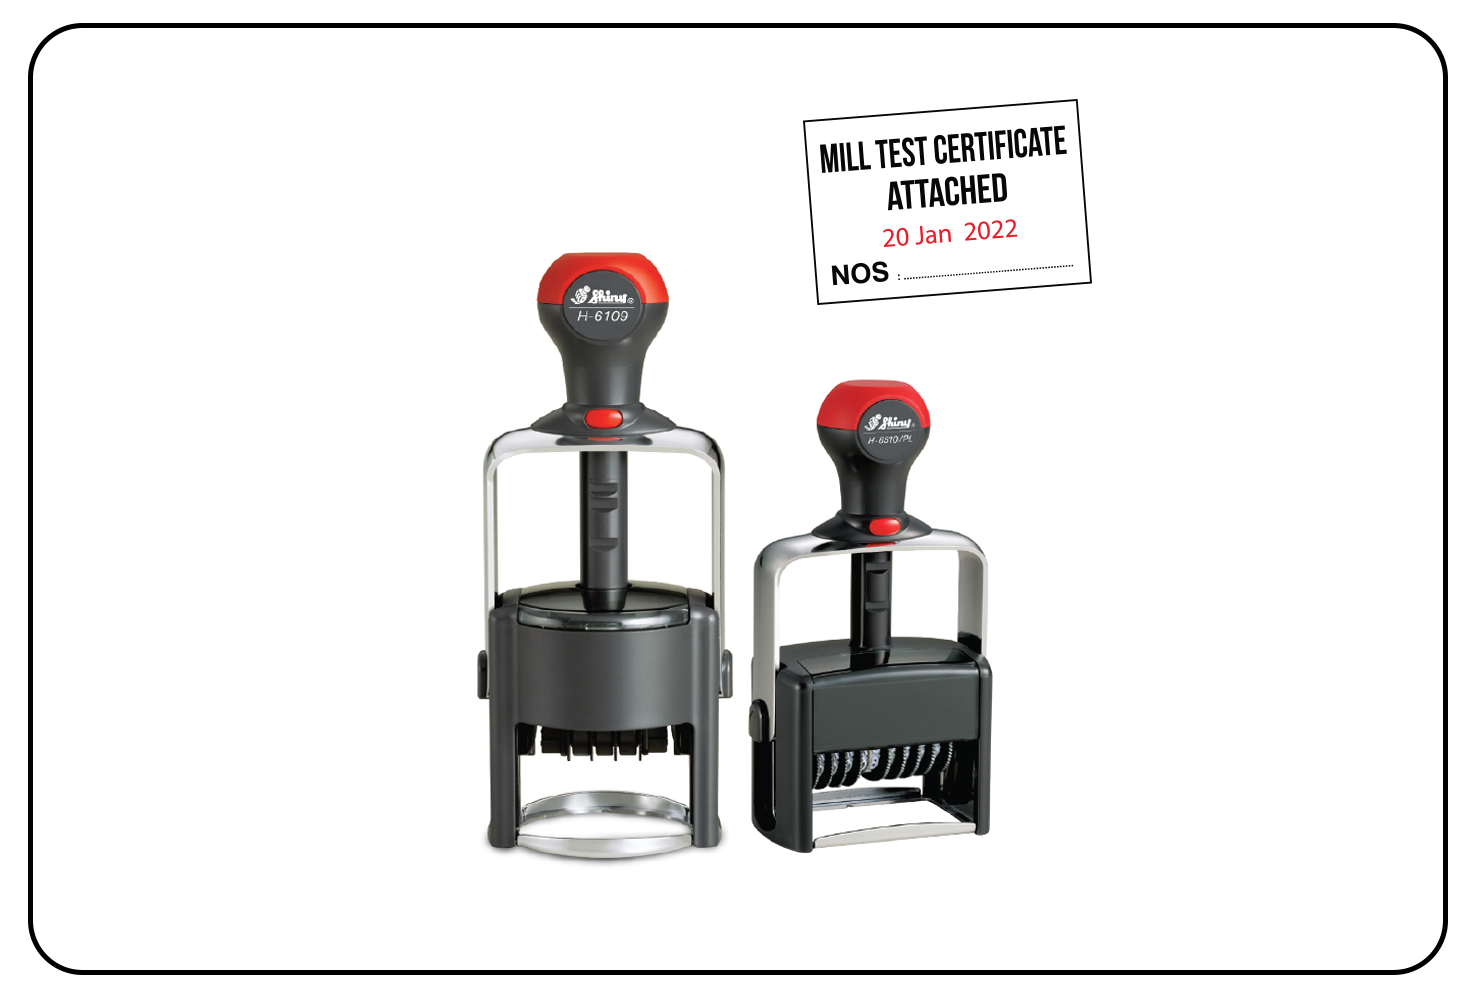 Durable heavy-duty self-inking stamp for high-volume tasks.